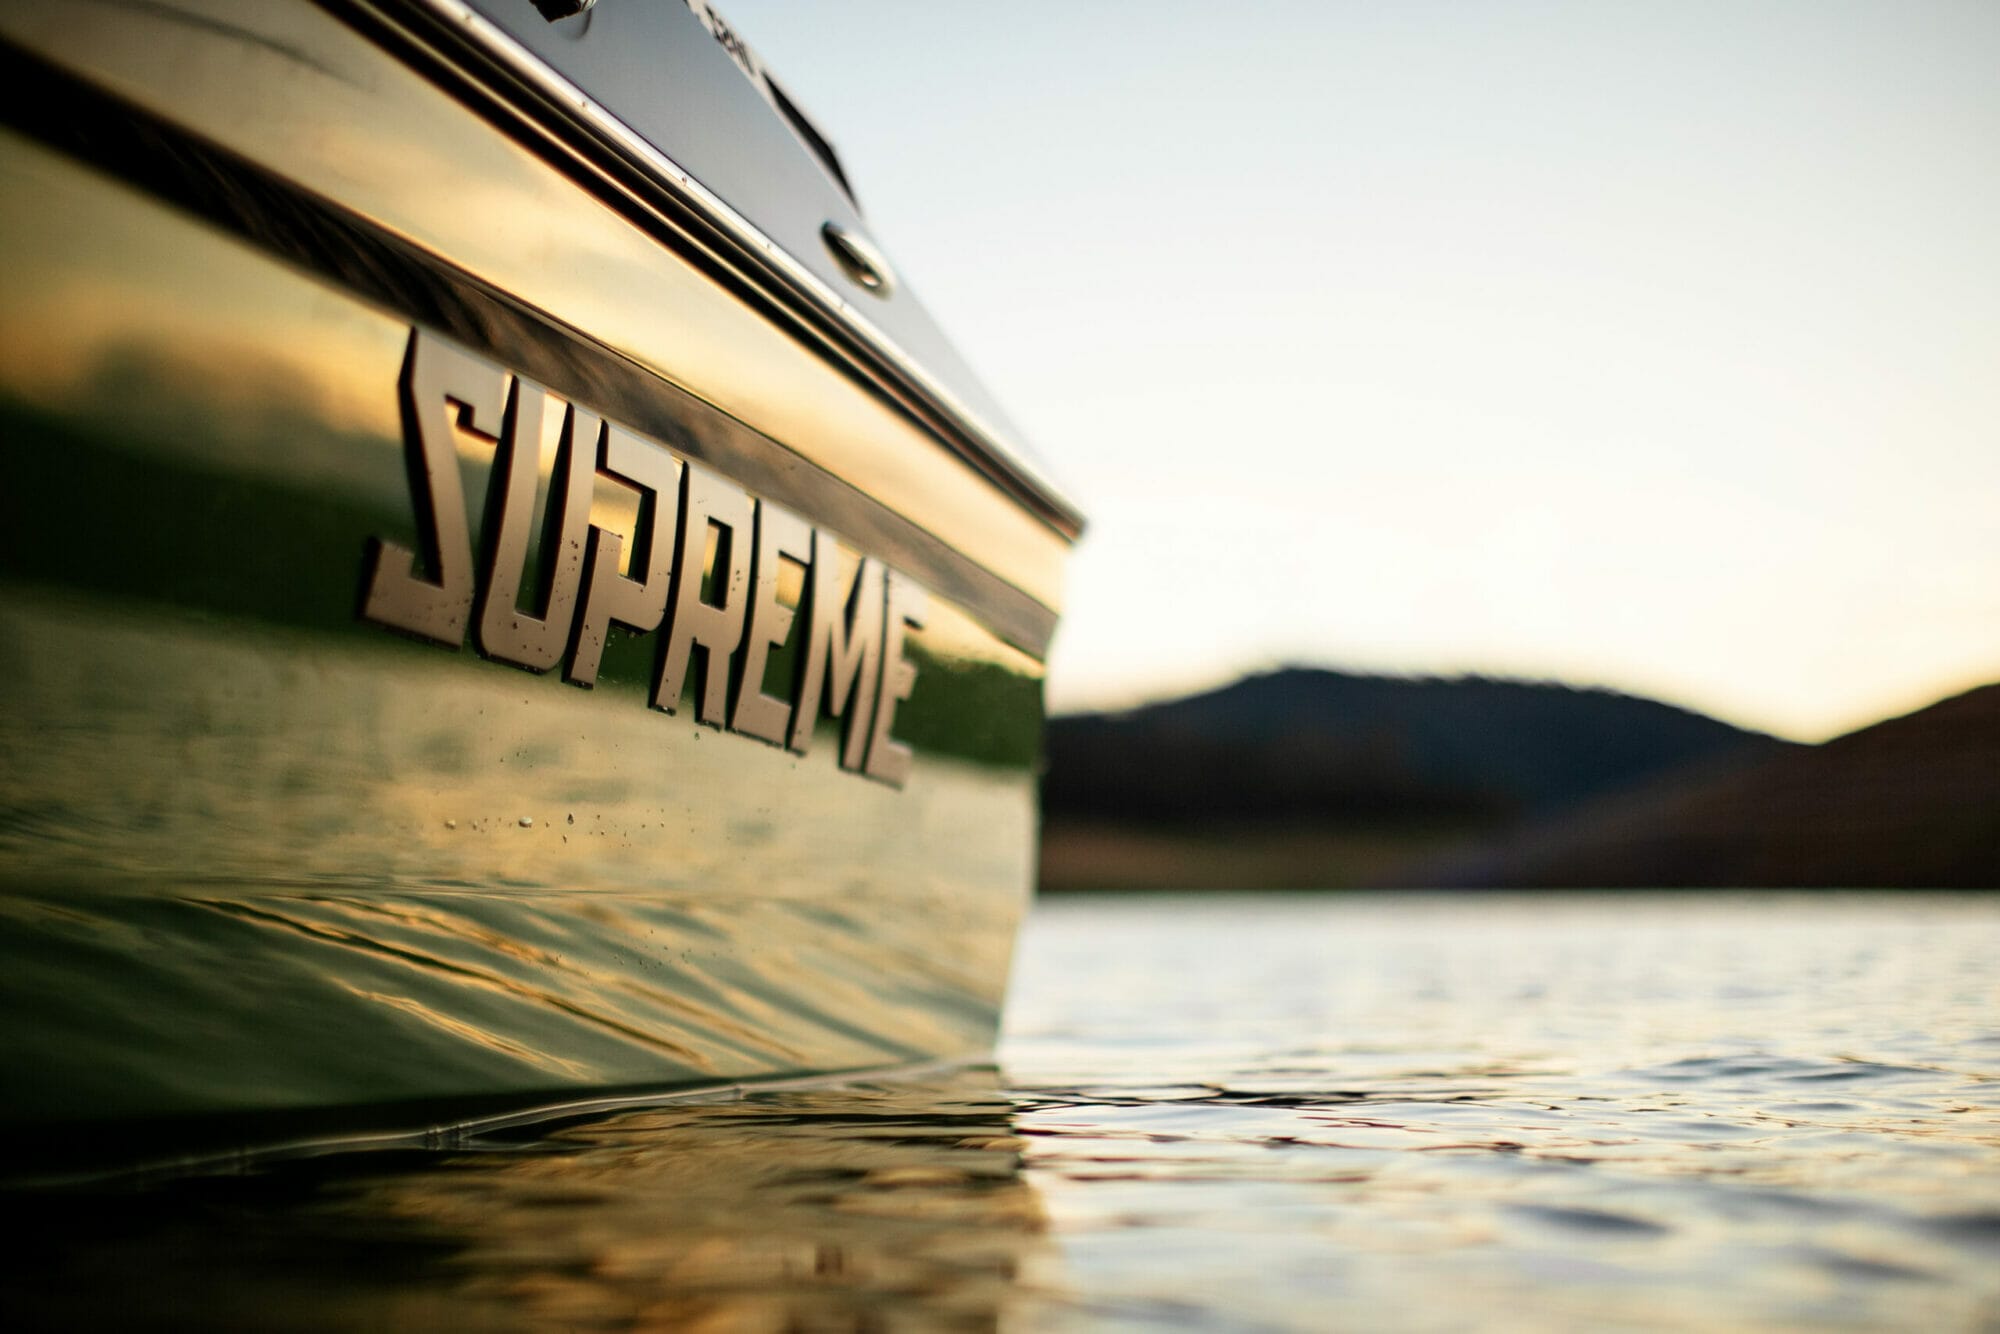 Supreme logo on the side of a S240 boat in the water